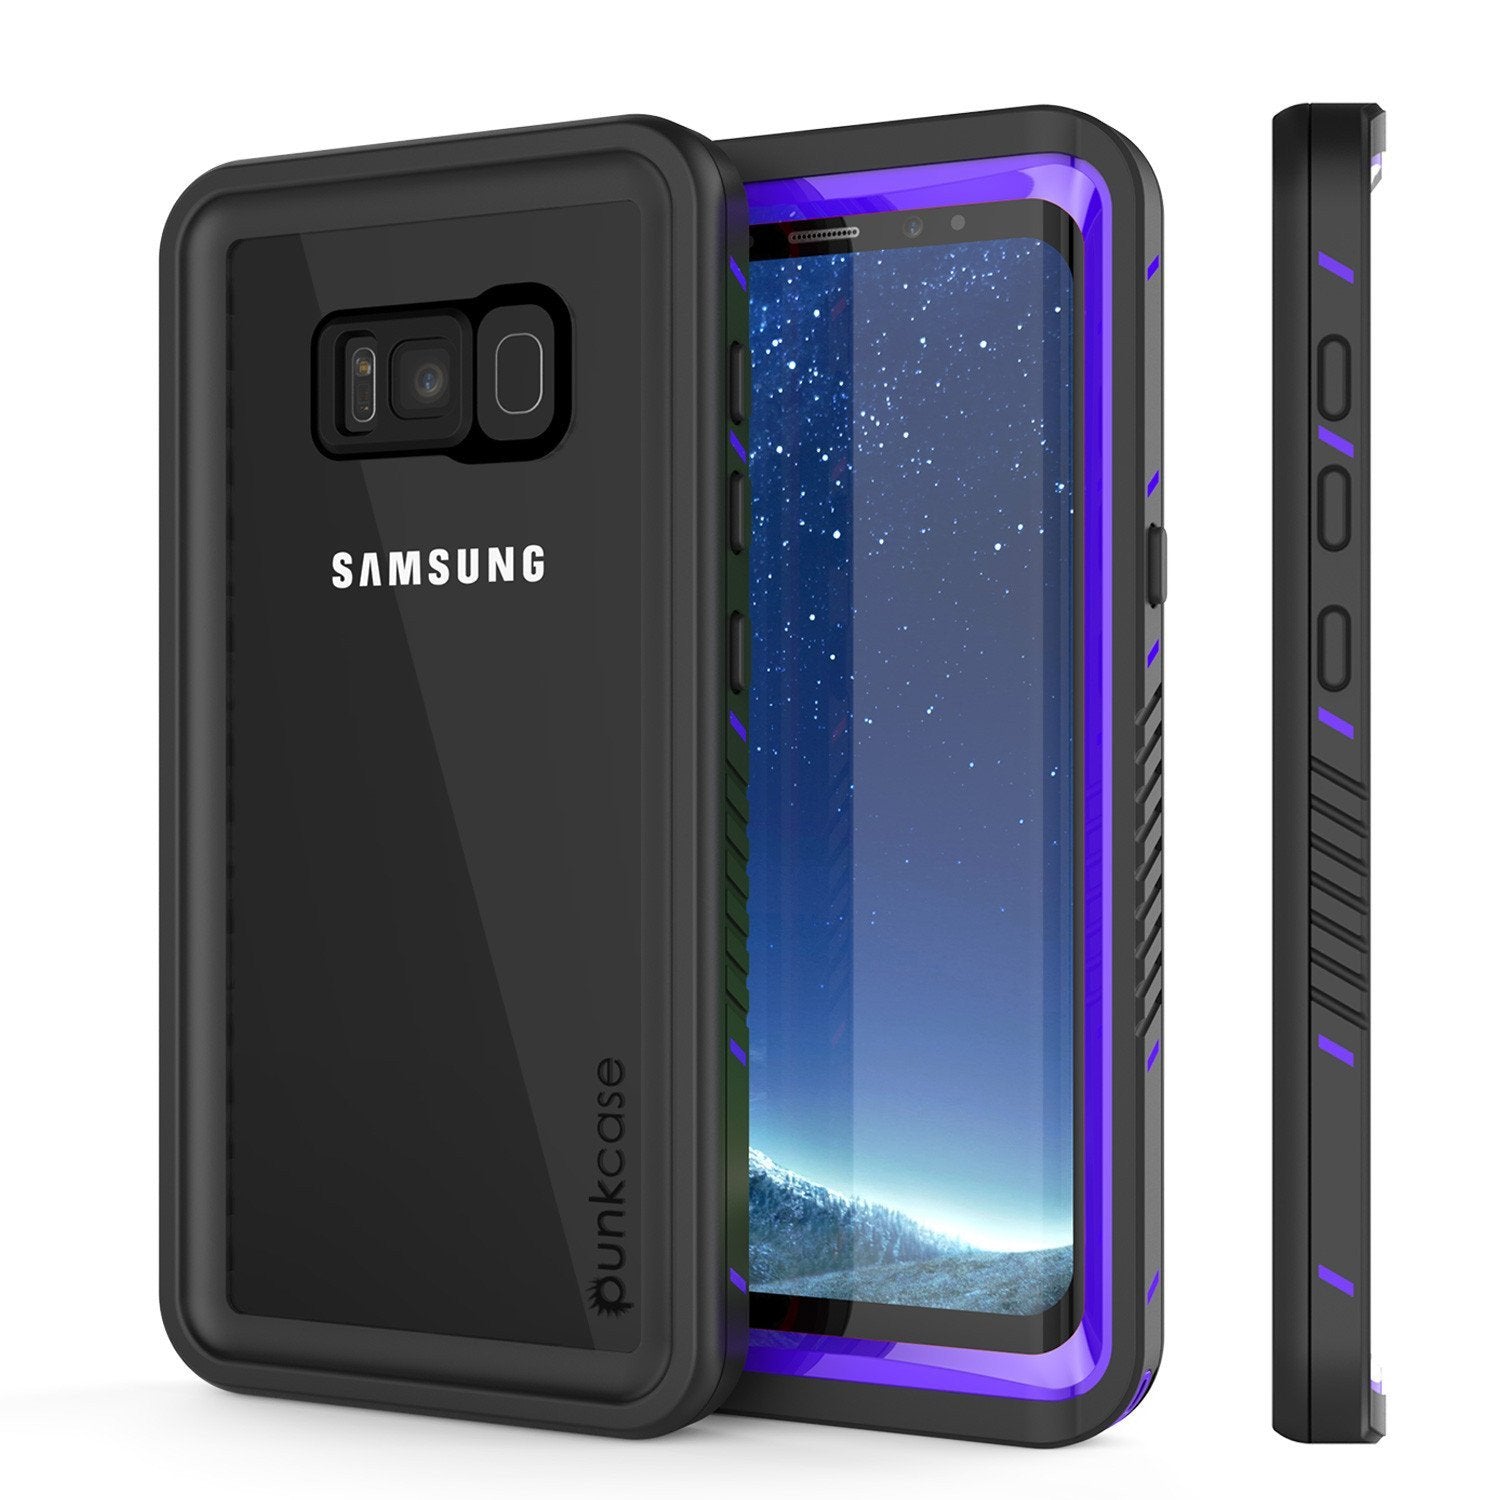 Galaxy S8 PLUS Waterproof Case, Punkcase [Extreme Series] [Slim Fit] [IP68 Certified] [Shockproof] [Snowproof] [Dirproof] Armor Cover W/ Built In Screen Protector for Samsung Galaxy S8+ [Purple]